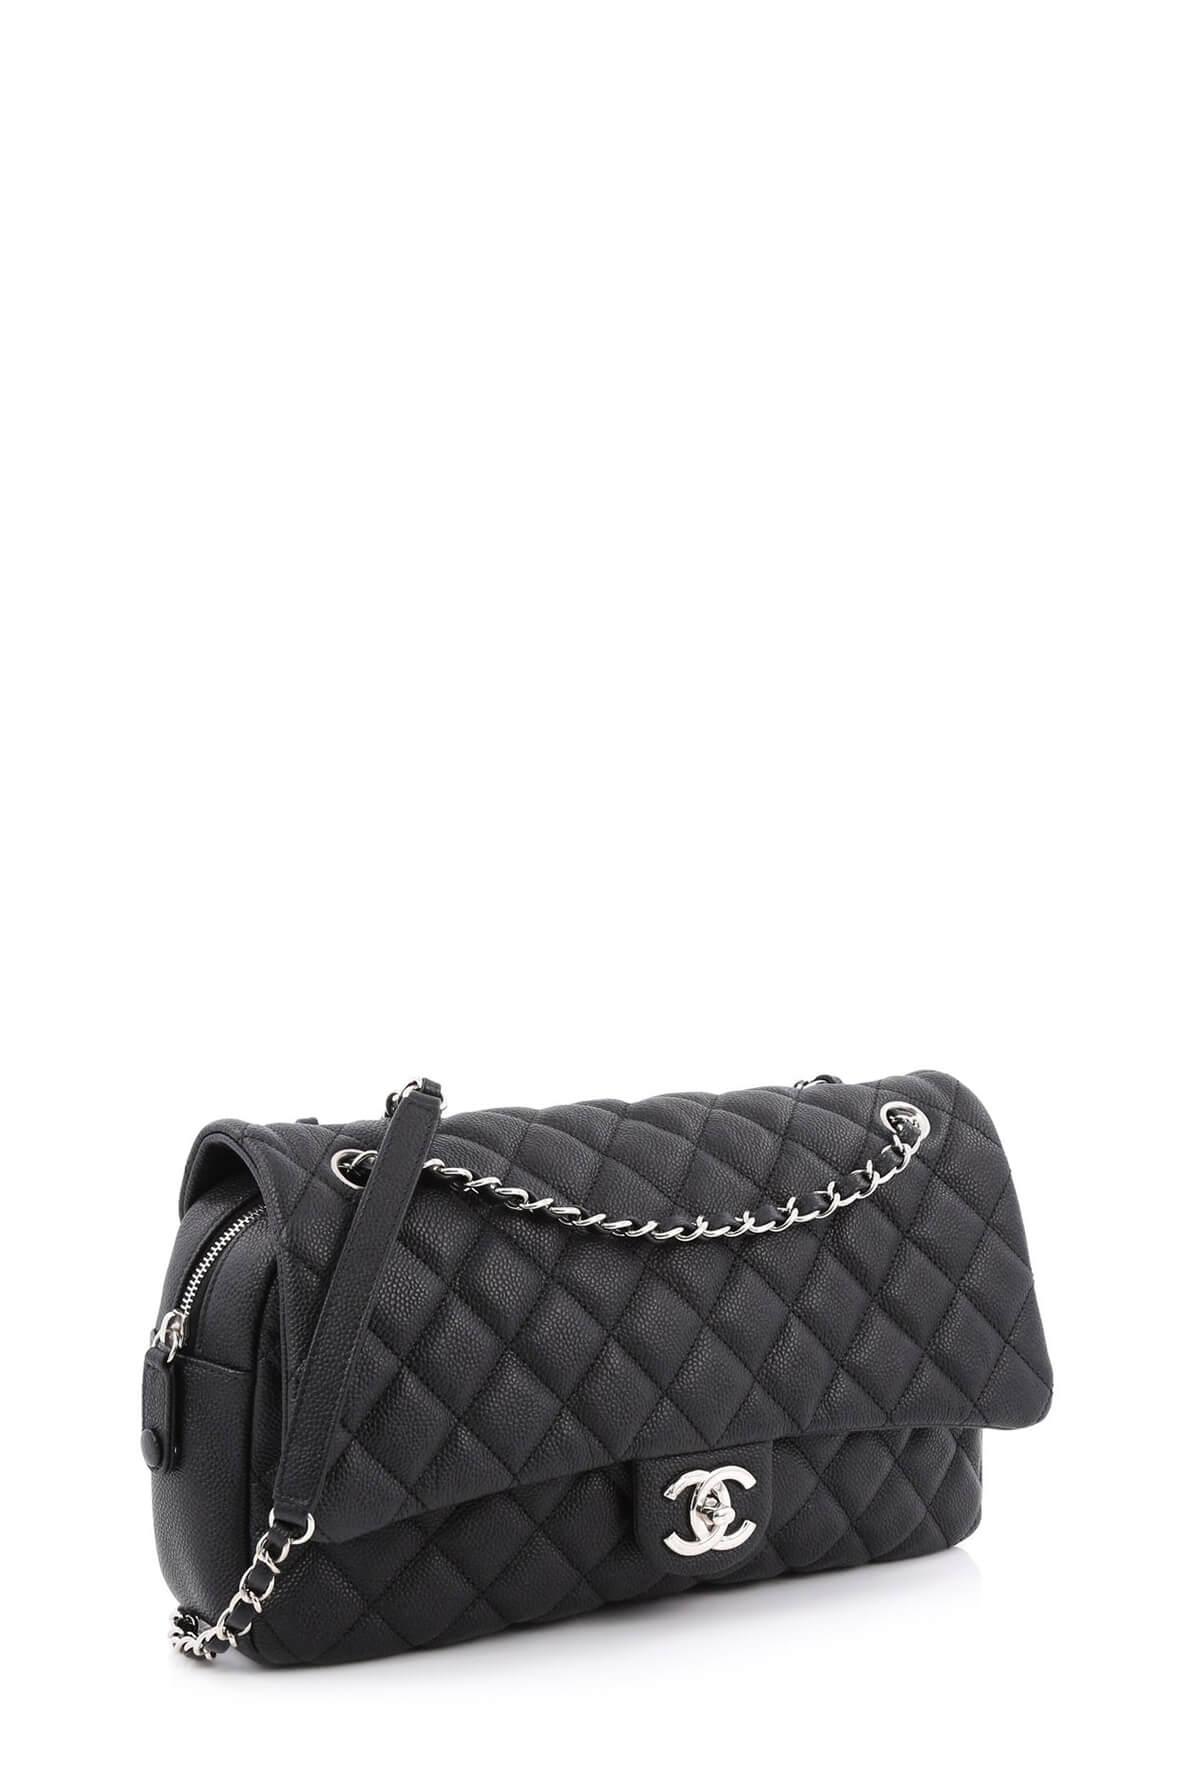 Jumbo Caviar Easy Flap Black with Silver Hardware – Style Theory SG